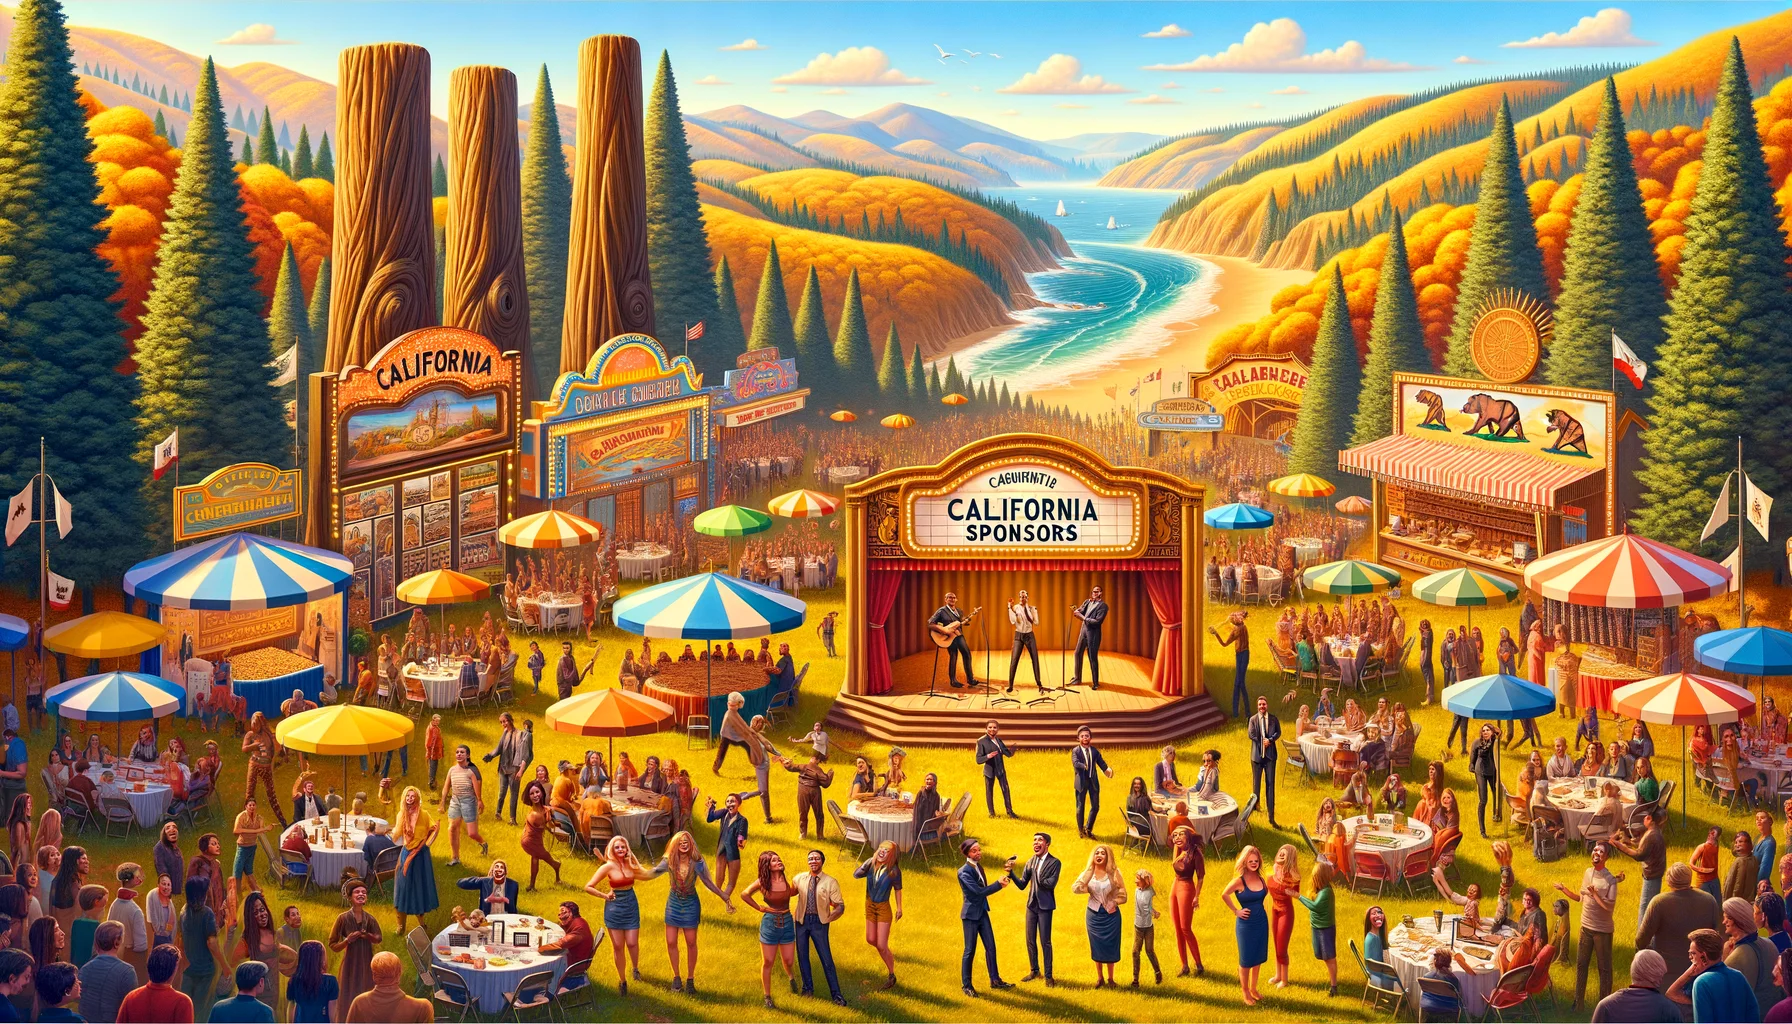 Create a realistically amusing image of a 'California Sponsors Showcase'. The scene includes fanciful yet credible California landscapes like pristine beaches, gigantic redwoods and golden rolling hills as backdrop. Sponsors' booths are bustling with people of diverse genders and descents such as Caucasians, Hispanics, and South Asians. Each booth is uniquely Californian in style and filled with creative and innovative exhibitions. Laughter is in the air as a duo of comedians perform onstage. Captivate the quintessential California vibe with warm, vibrant colors and a clear, sunny sky.